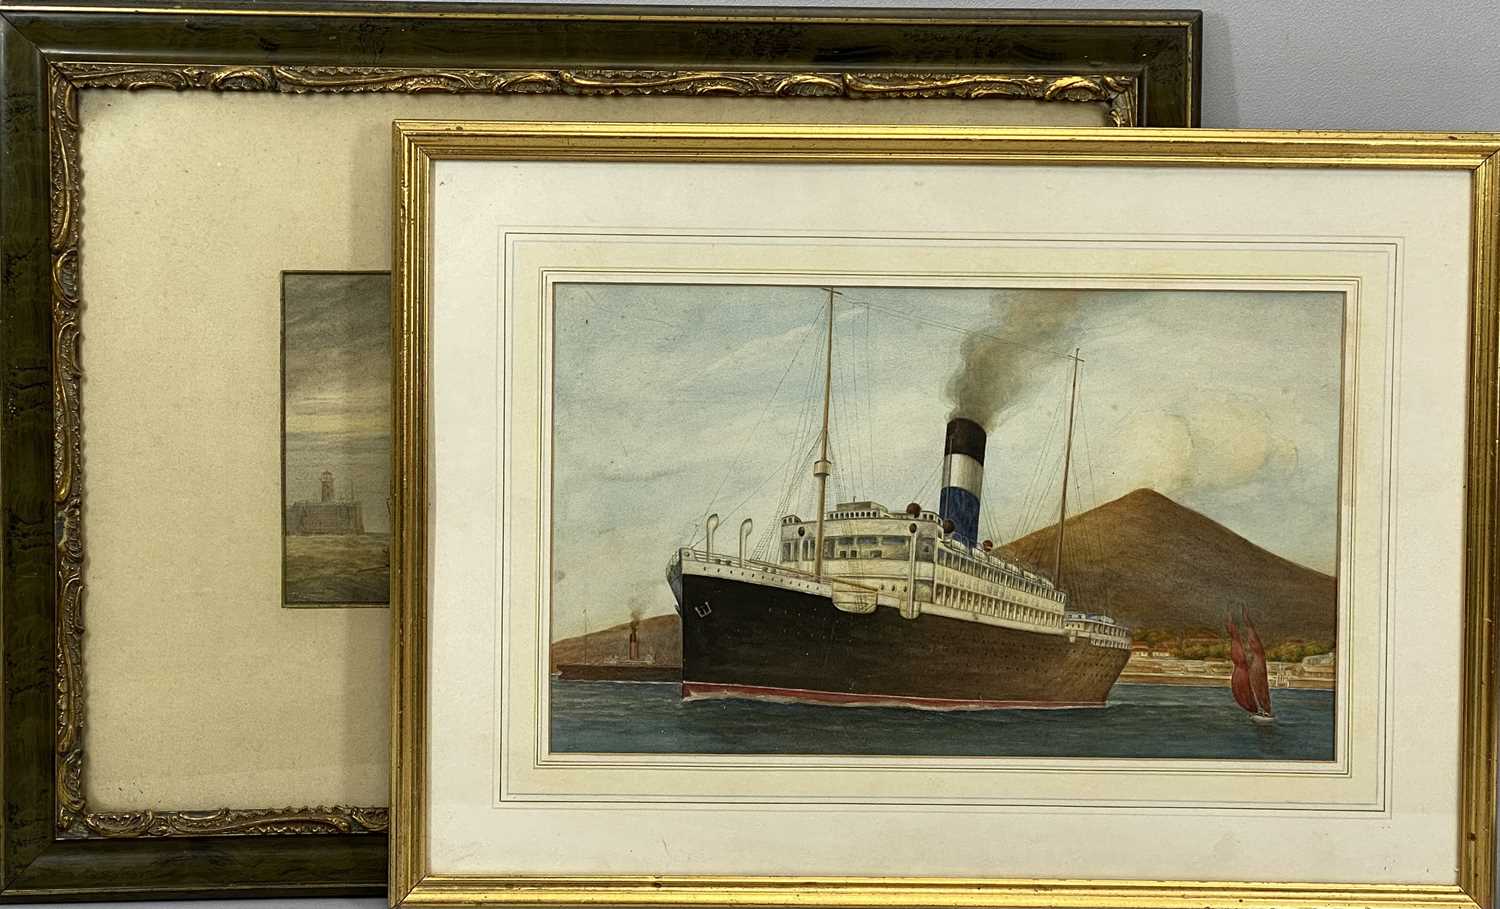 ATTRIBUTED TO JOHN ROBERT MATHER (INITIALLED JRM) mid-19th century marine watercolour - sailing - Image 4 of 4